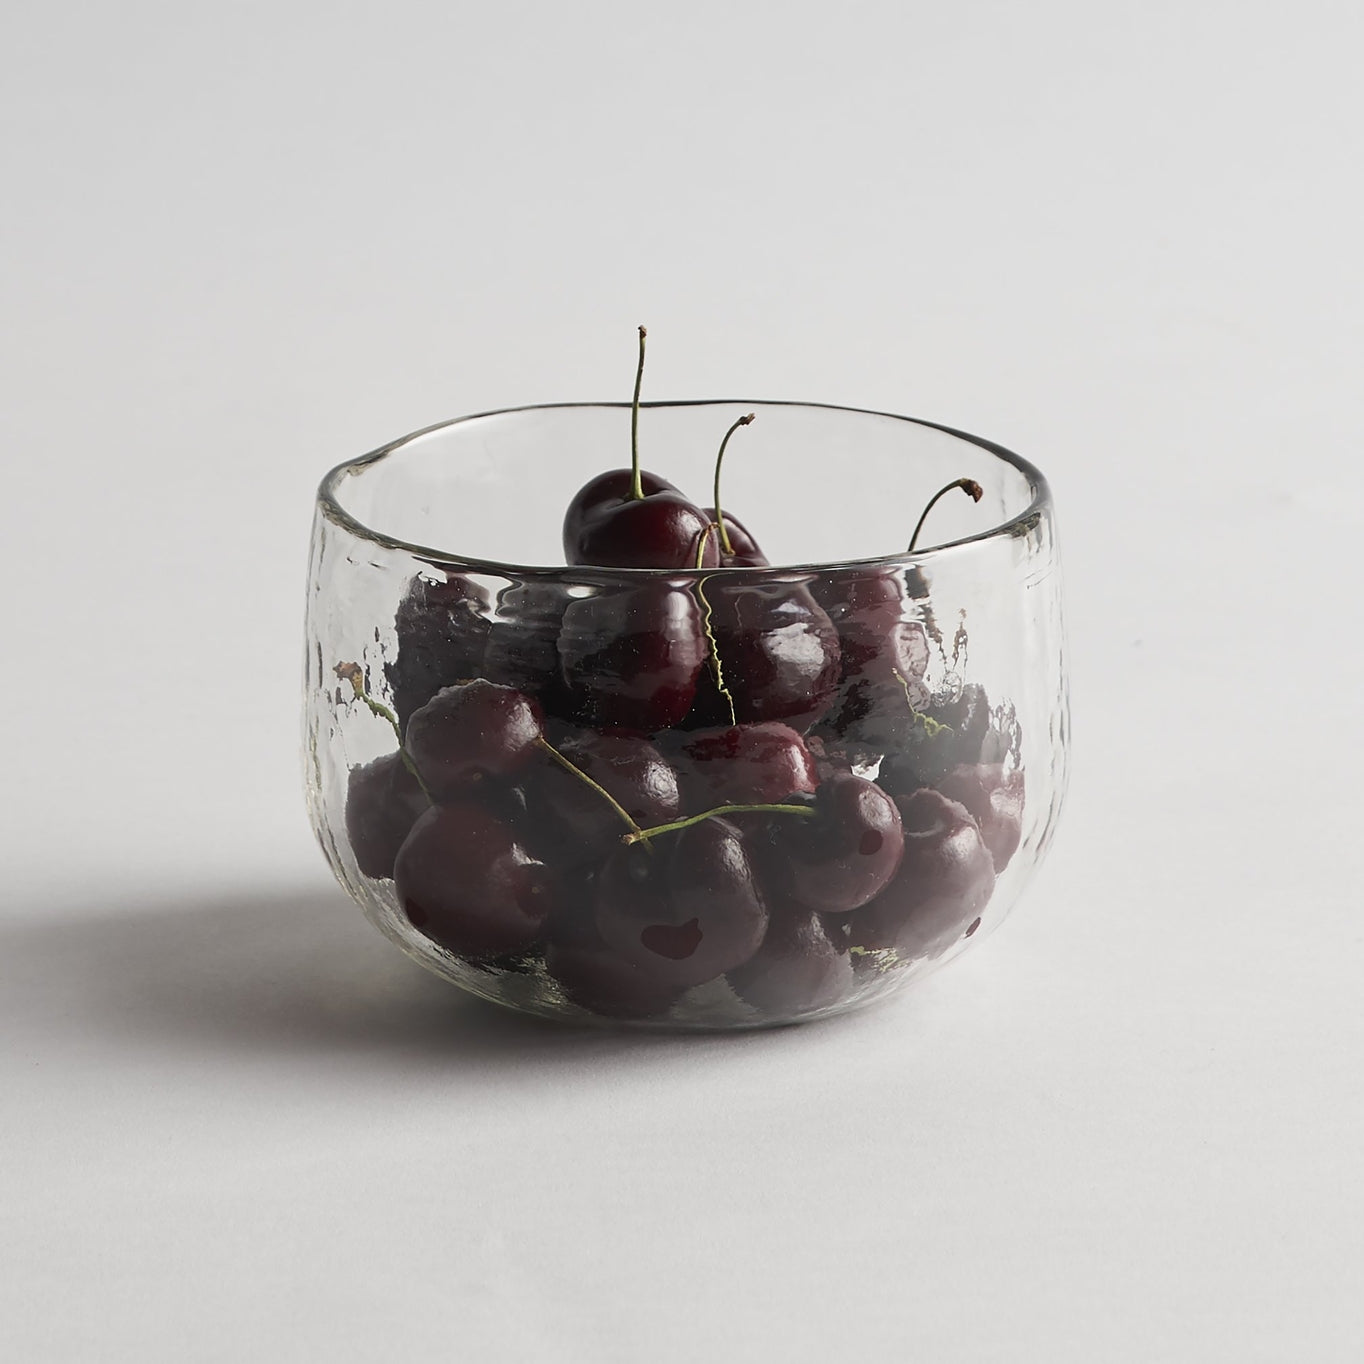 Clear, thick glass bowls are far from ordinary with their straight-sided shape and polished, dimpled exterior. These versatile bowls are nicely sized for a serving of soup or as a compact tabletop display piece. 